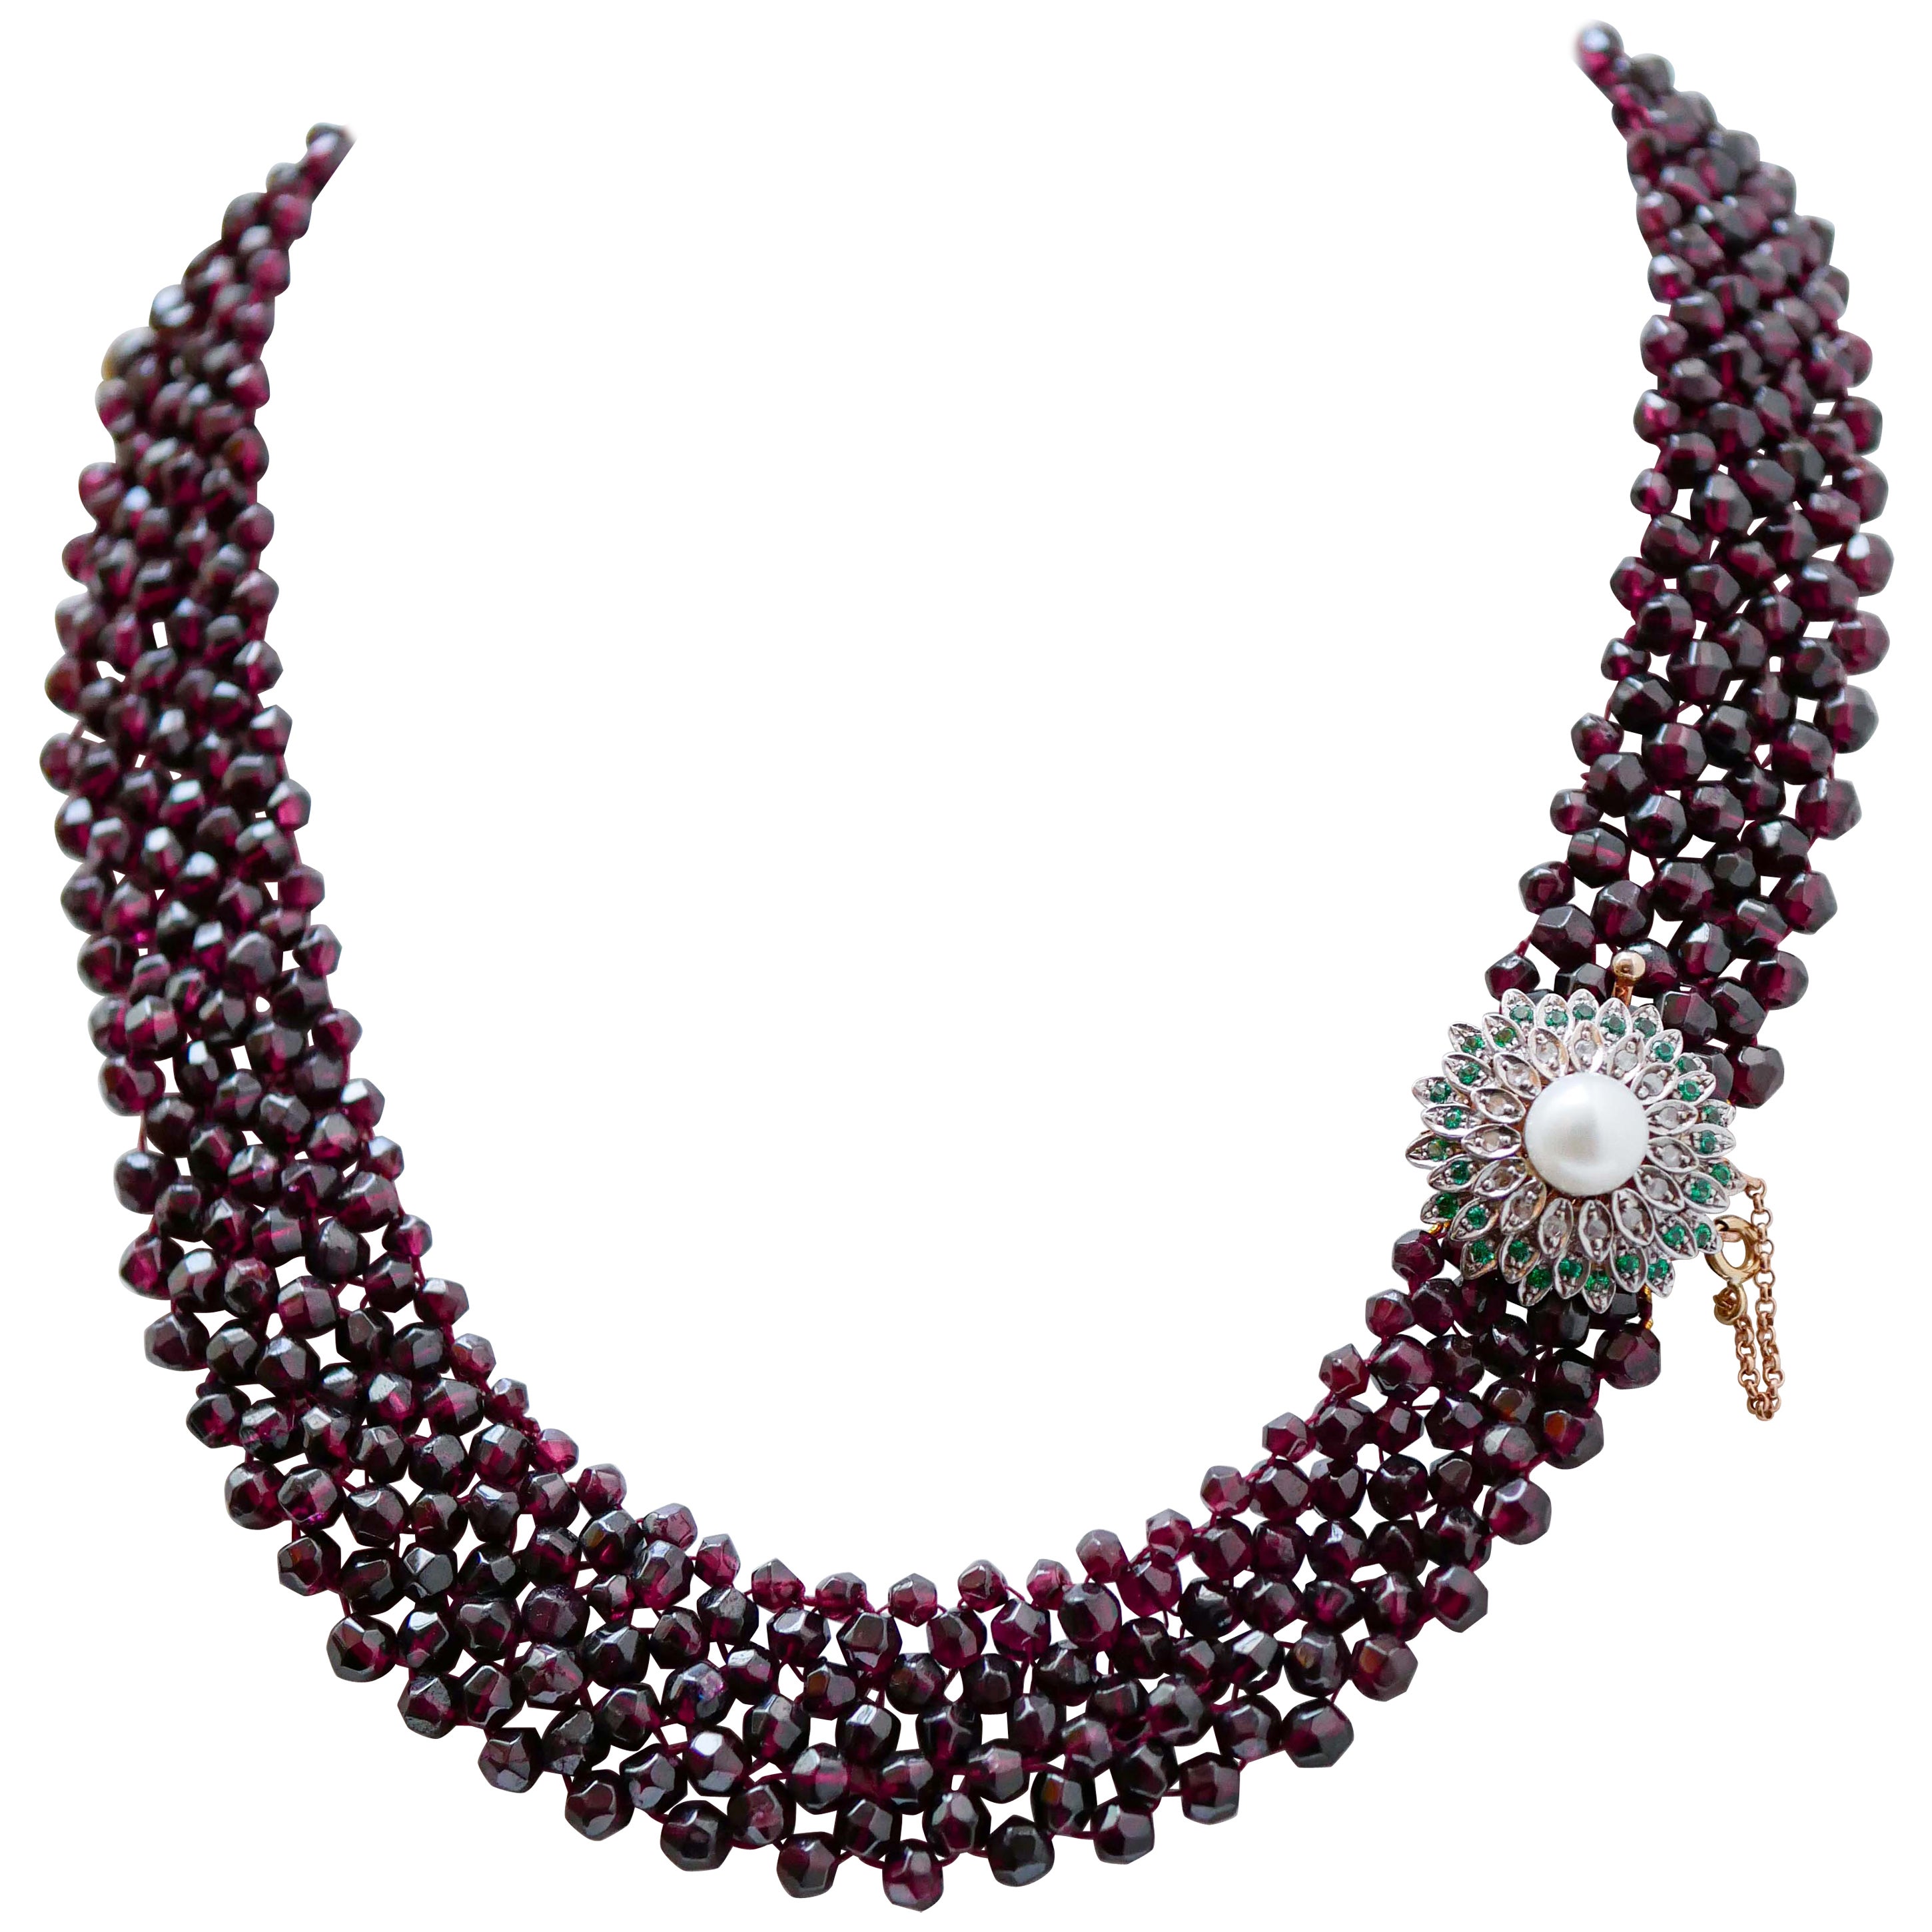 Garnets, Hydrothermal Spinel, Diamonds, Pearl, Rose Gold and Silver Necklace. For Sale